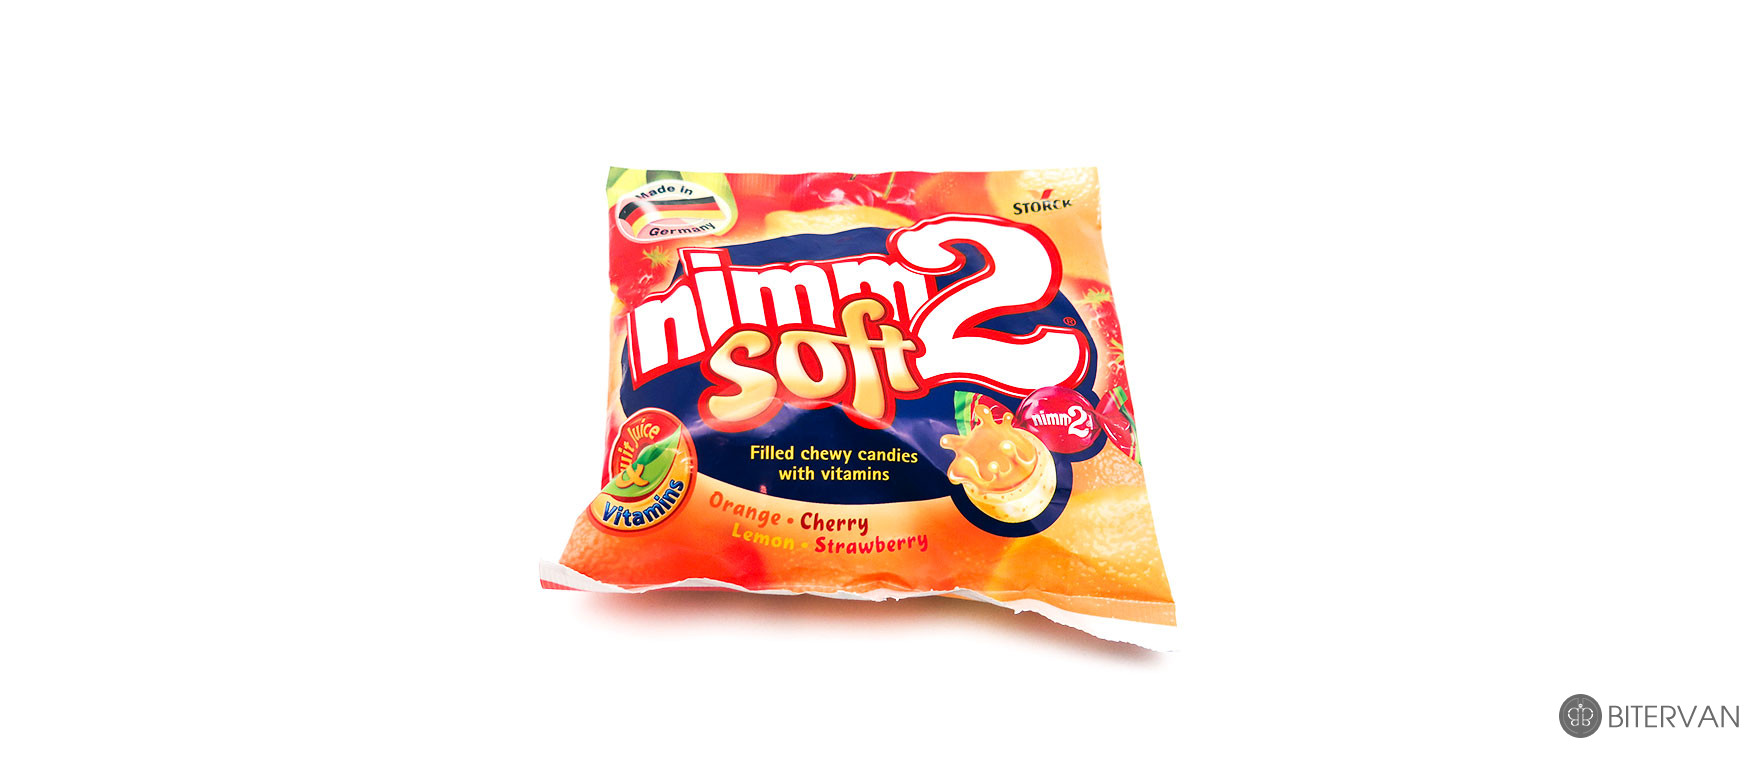 nimm2 soft Filled chewy candies with vitamins- Orange.Cherry.Lemon.Strawberry